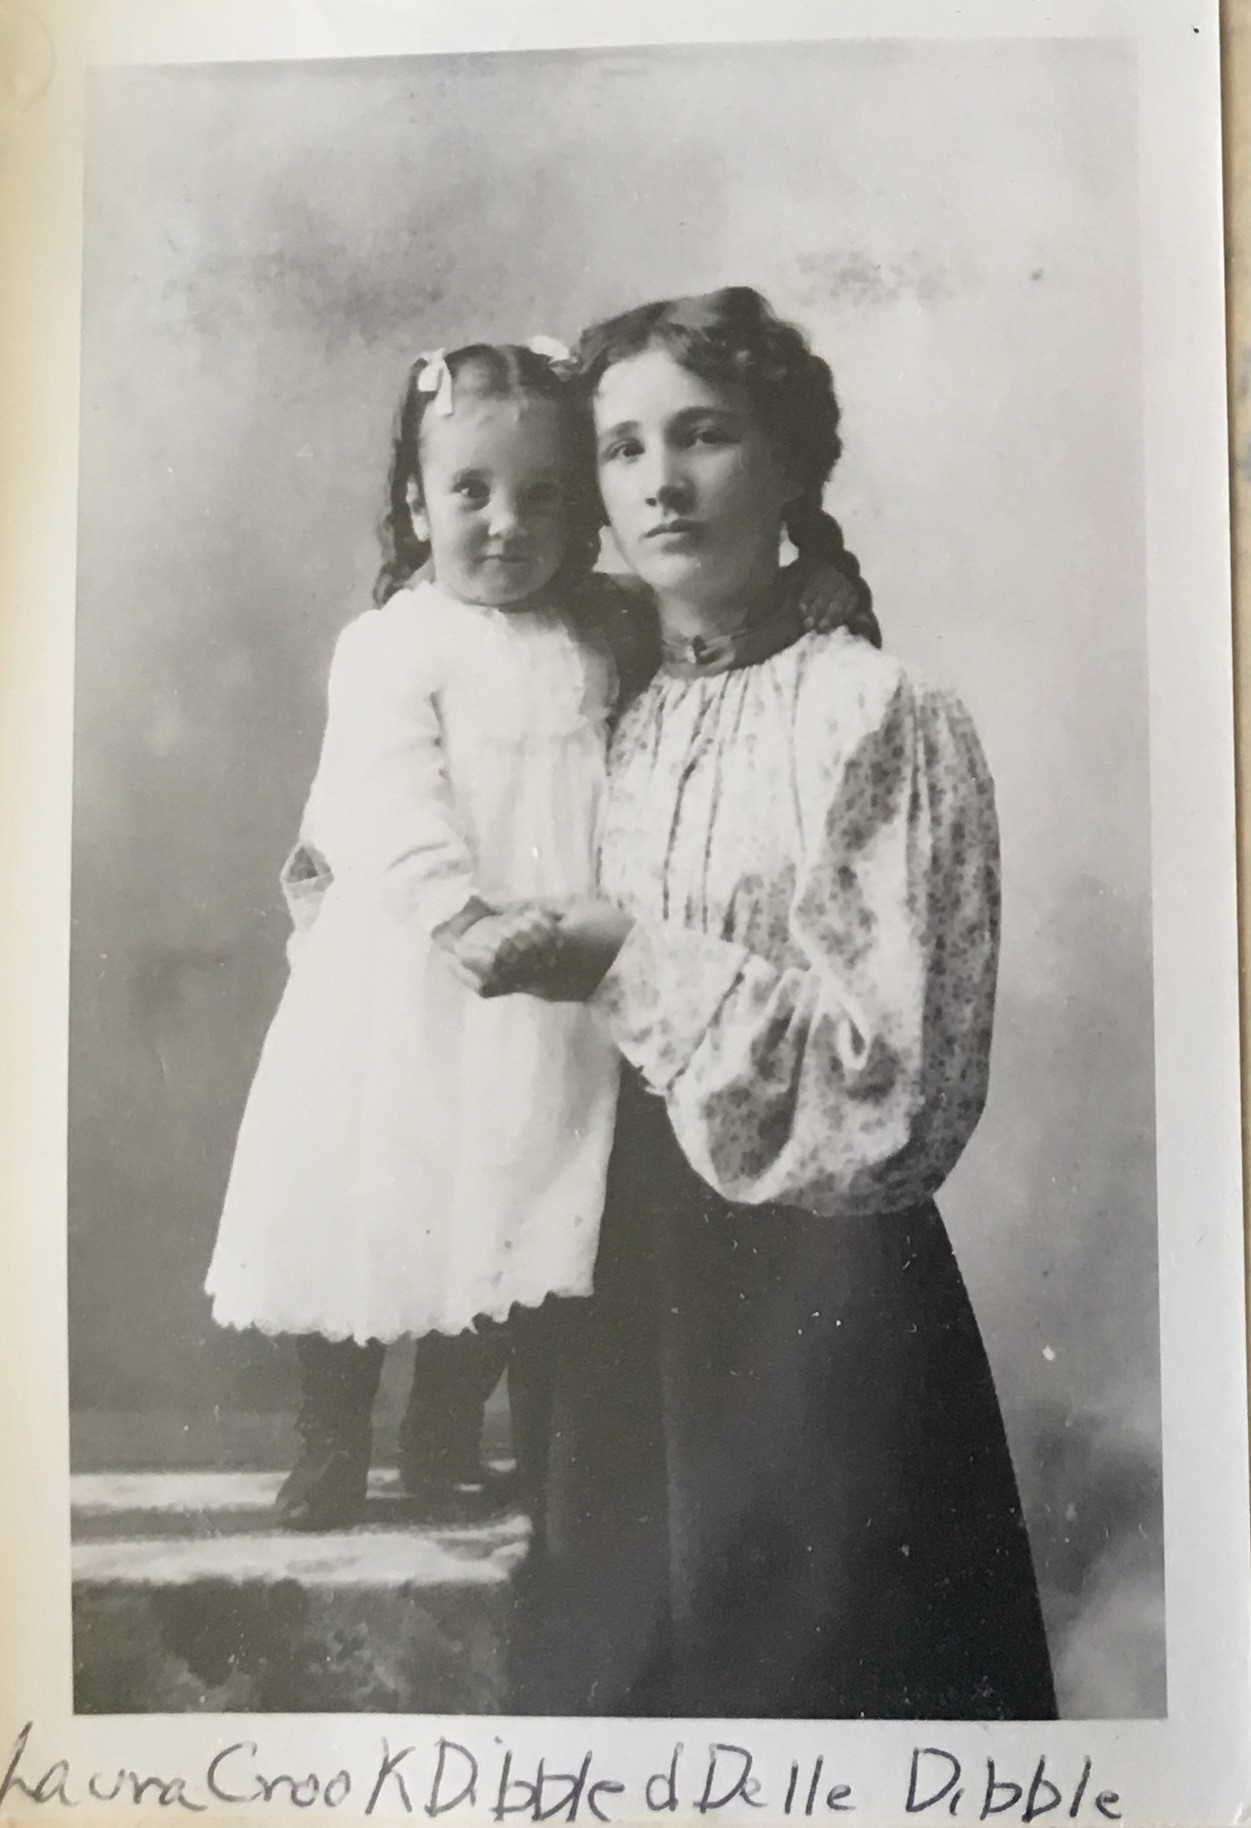 IMAGE/PHOTO: Laura Crook Dibble and daughter Della Dibble: Black and white photo of Della Dibble, about age 3, wearing a calf-length white dress and hair ribbons,standing on a table and holding the hand of her mother, Laura Dibble, wearing a loose-fitting white patterned blouse and dark skirt, with her braided hair falling down behind her back, standing beside her